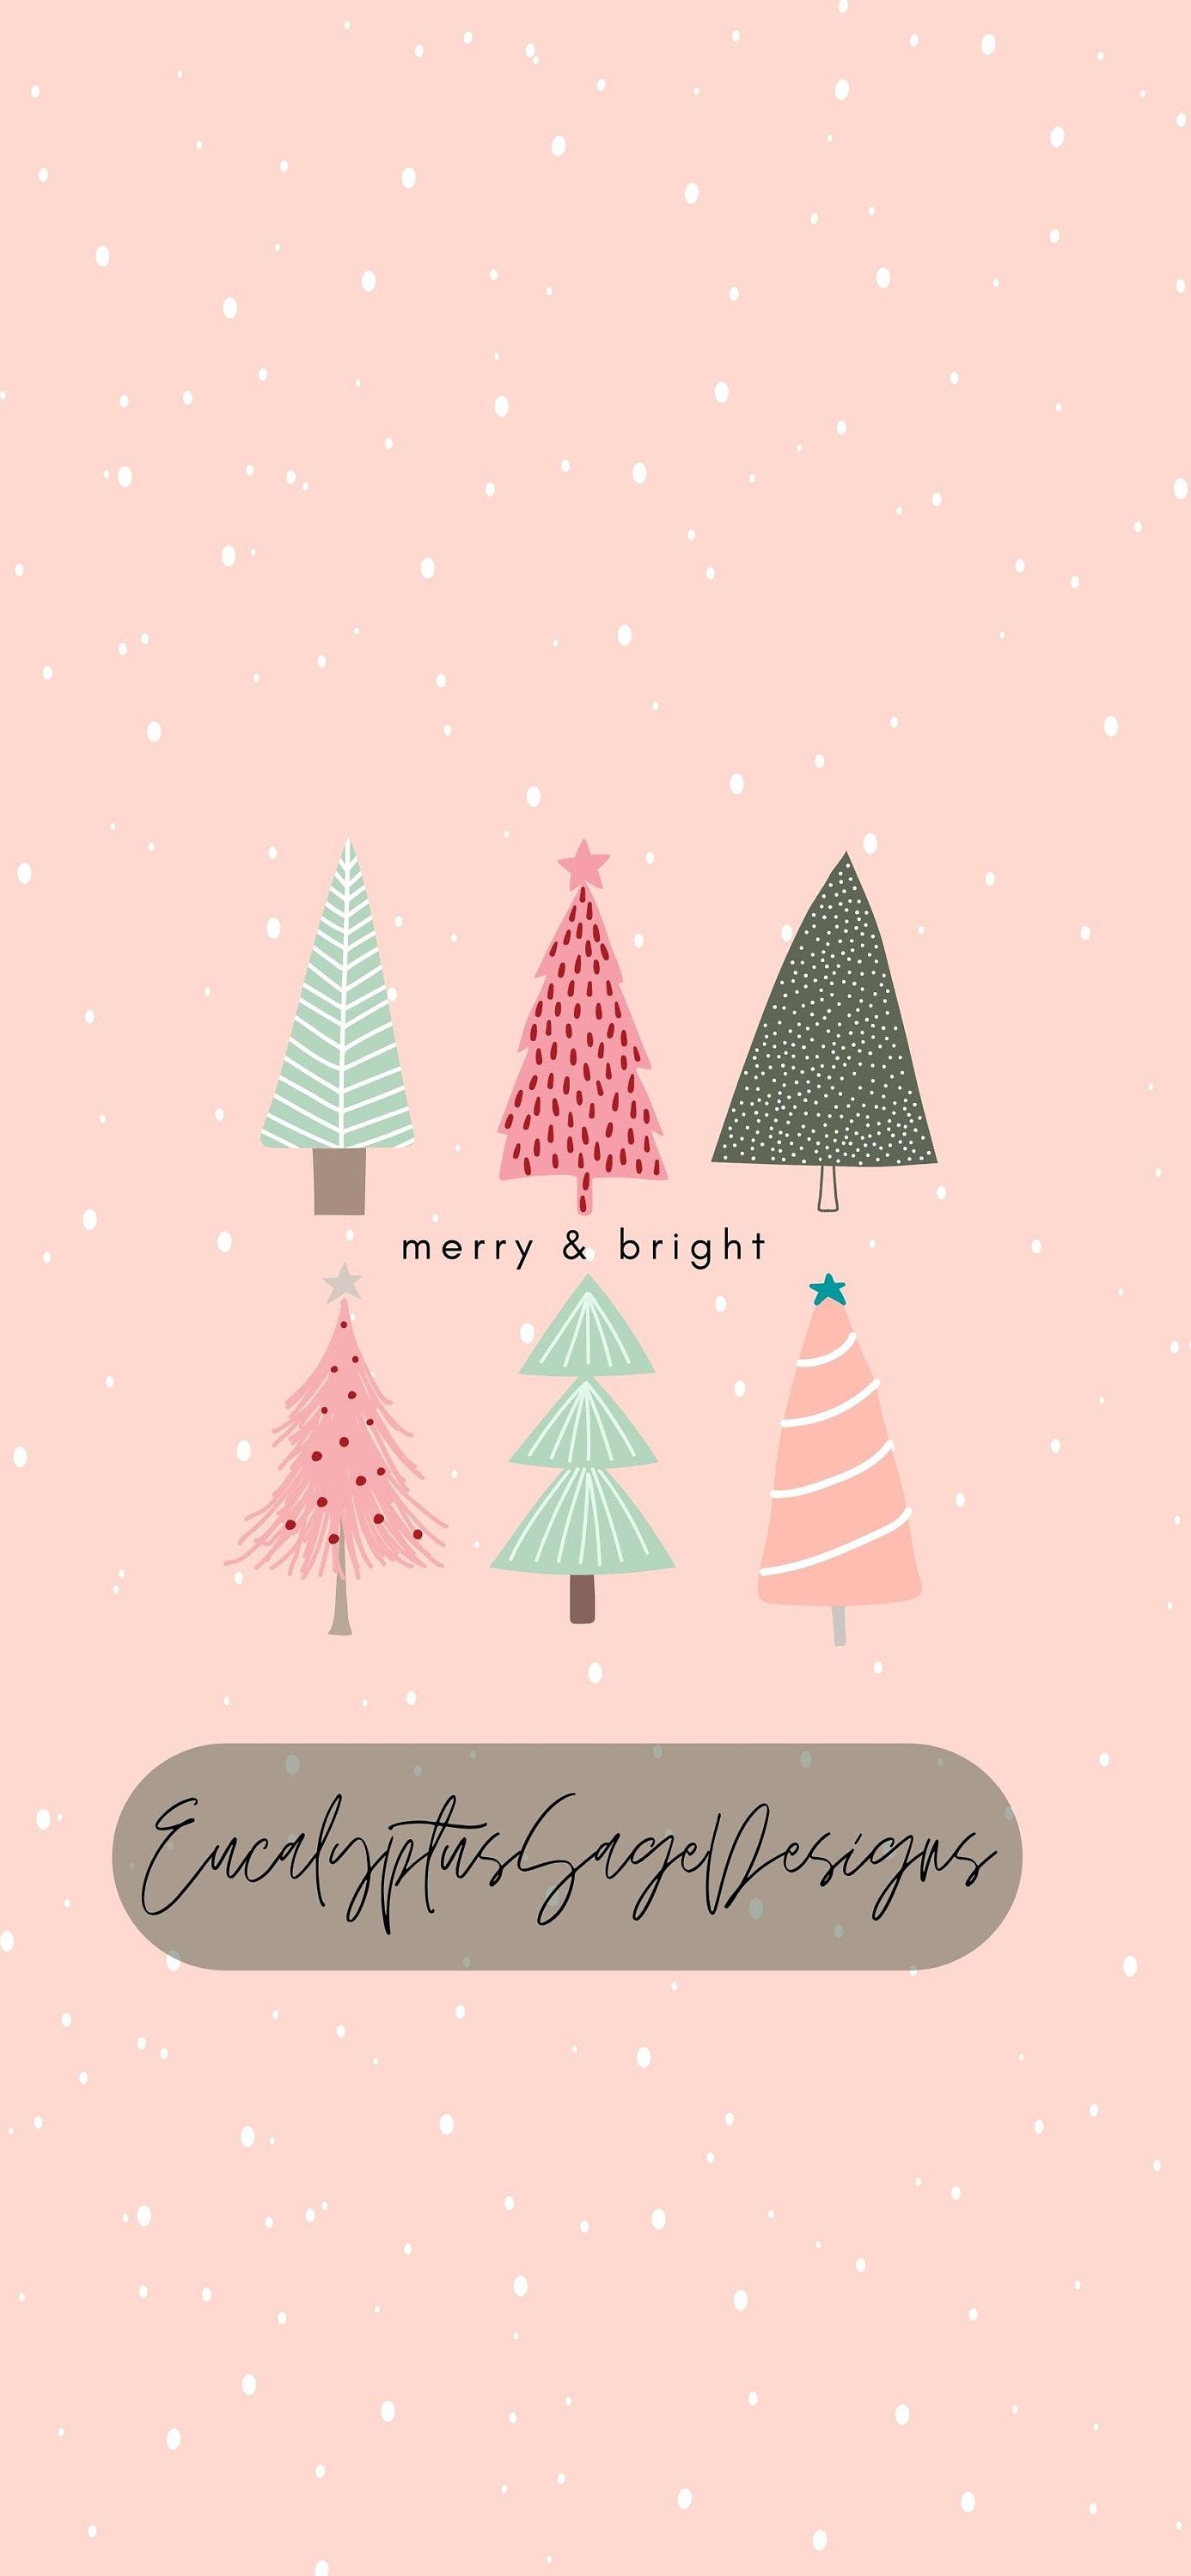 Preppy Christmas Wallpapers   Etsy